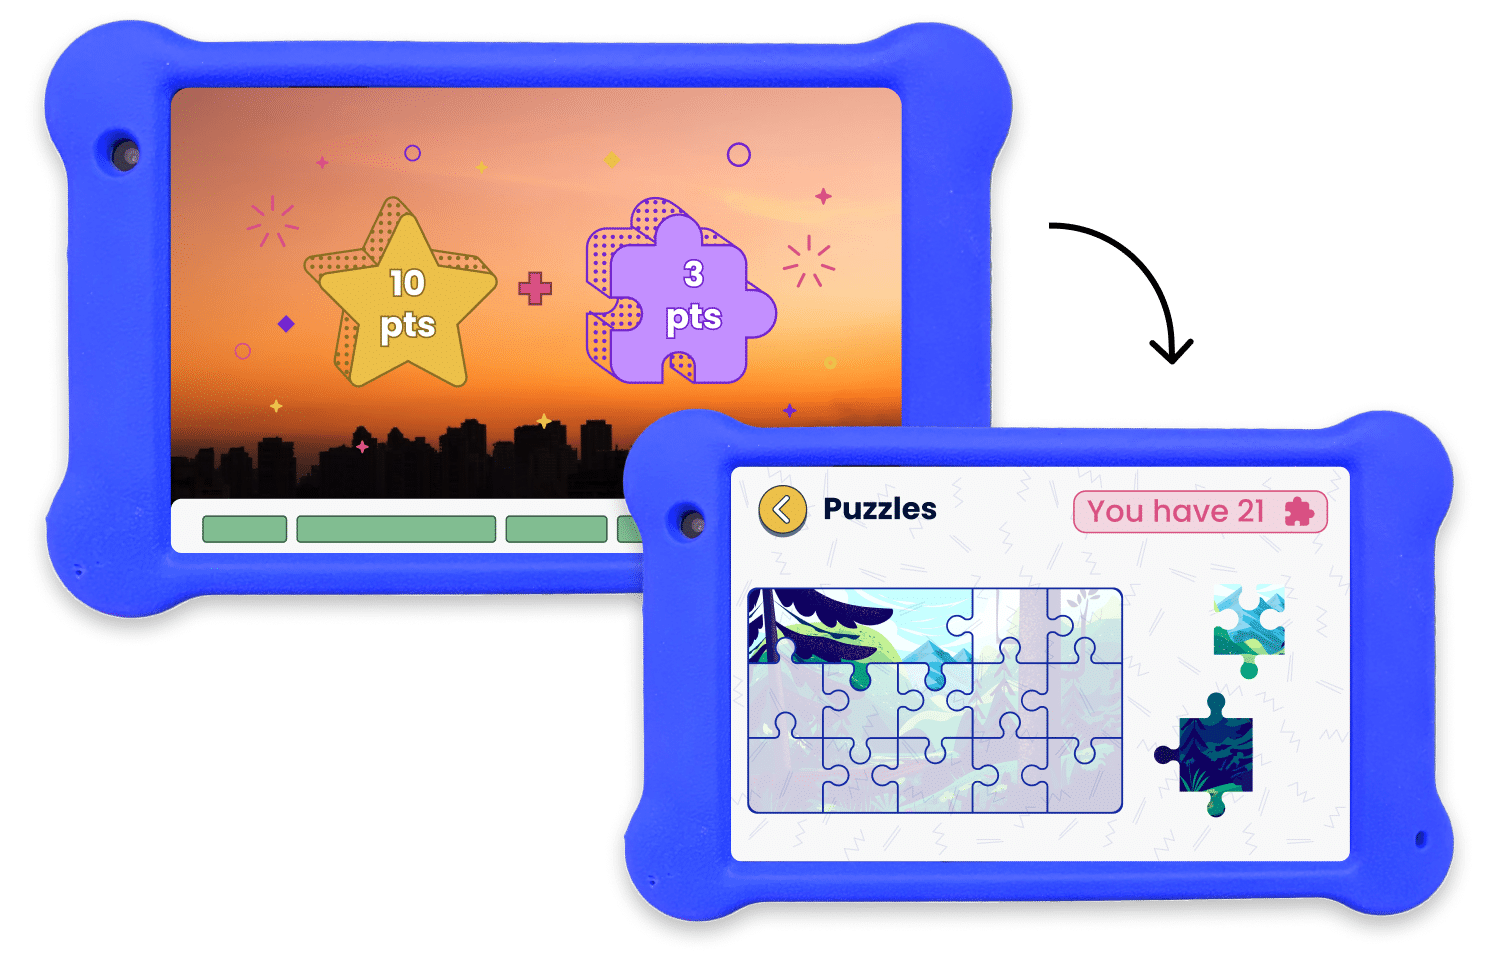 2 blue Goallys, with one displaying the end of a morning routine where a child earned 3 puzzle pieces, and the second showing the Puzzle App on Goally, where the child can use those puzzle pieces to finish a puzzle.